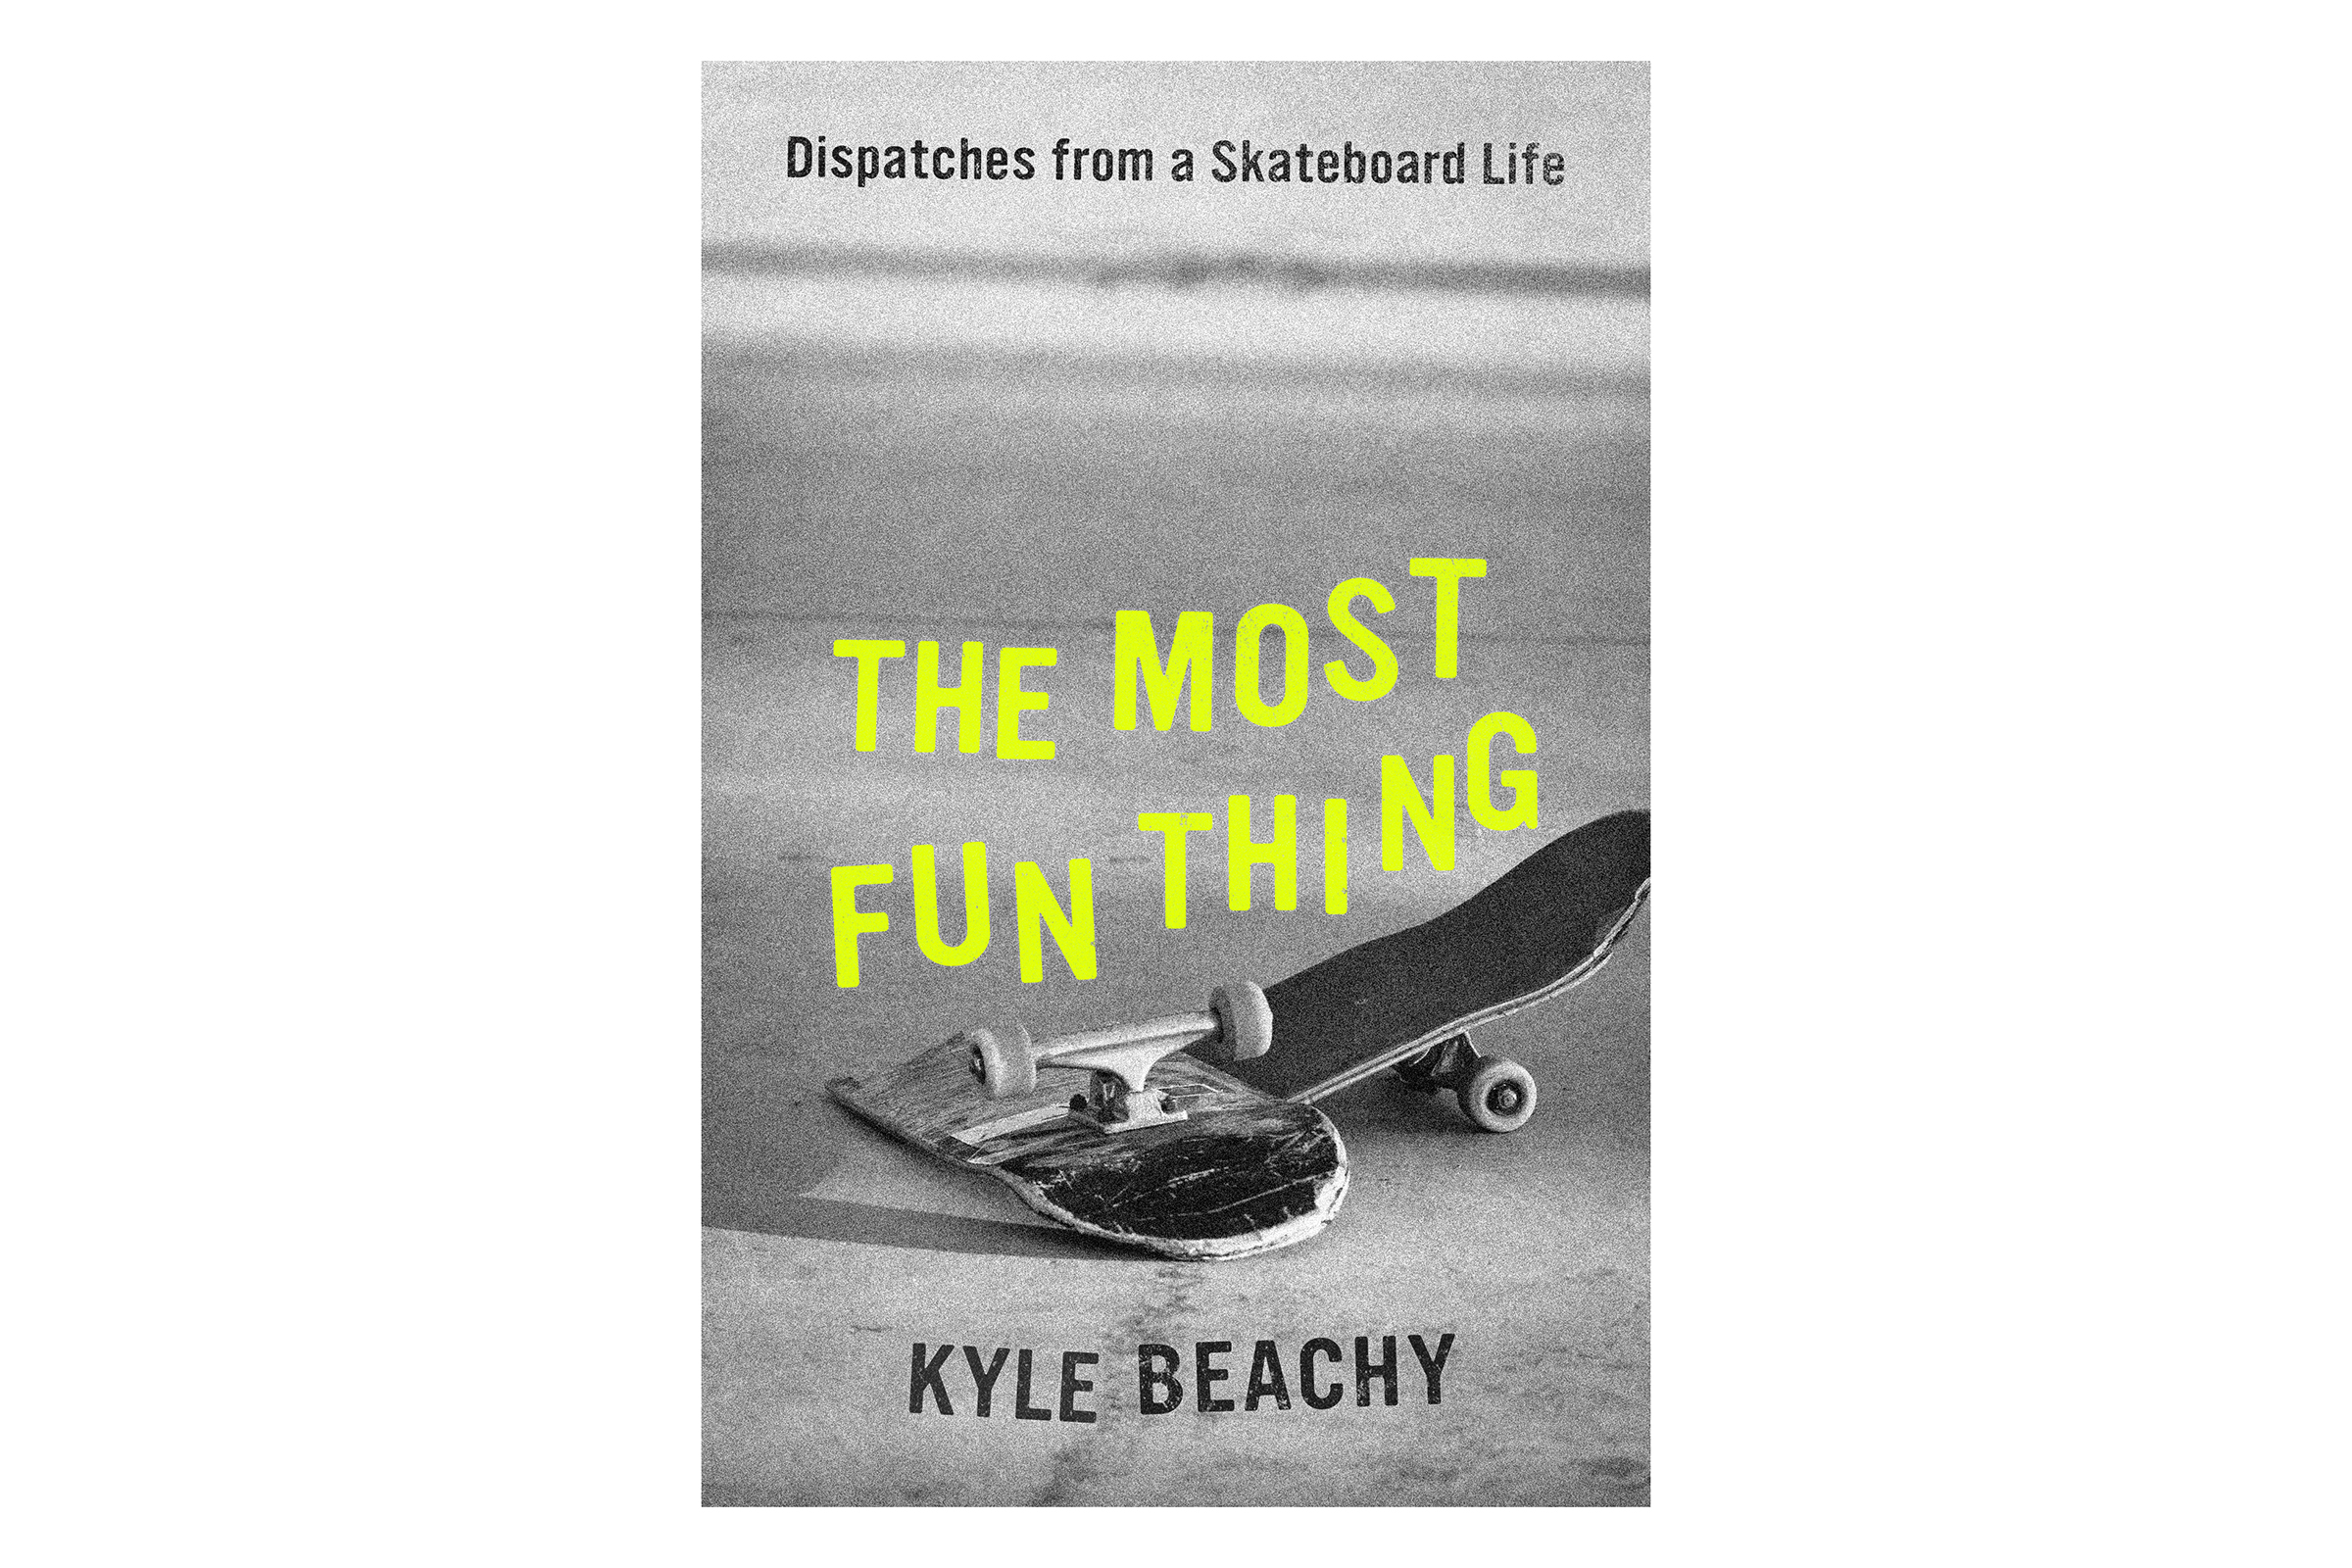 the book cover of "the most fun thing: dispatches from a skateboarding life" by kyle beachy